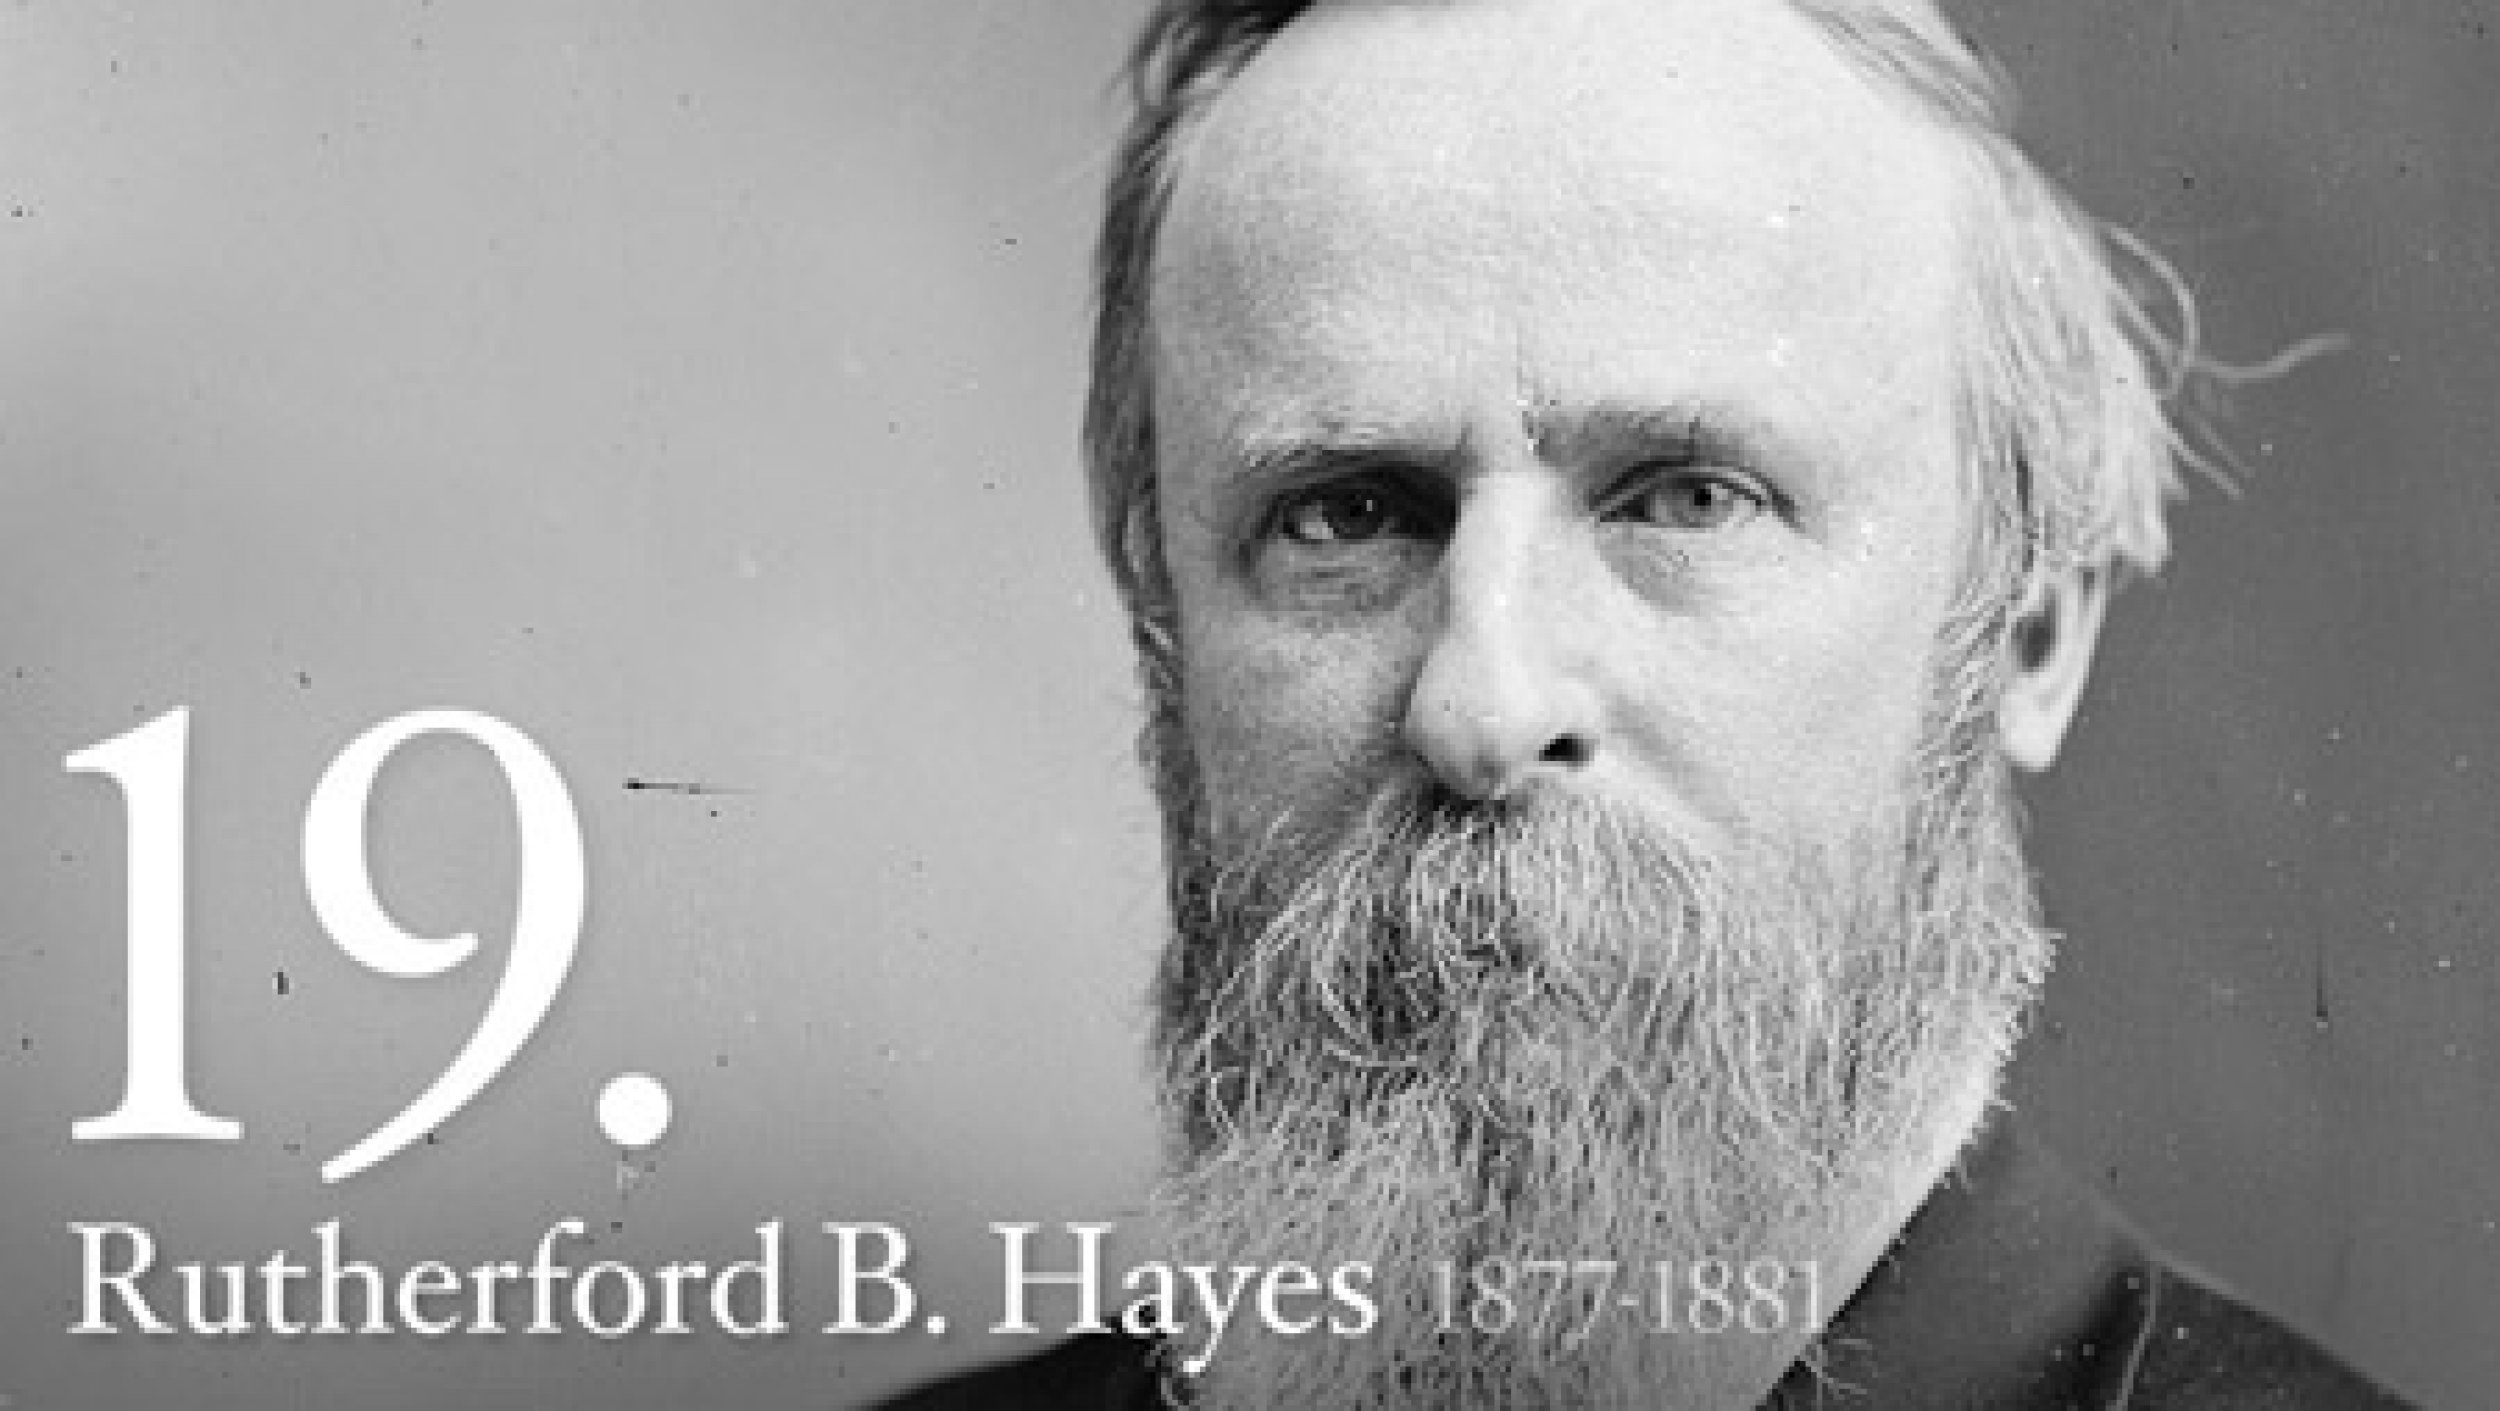 Rutherford B. Hayes 